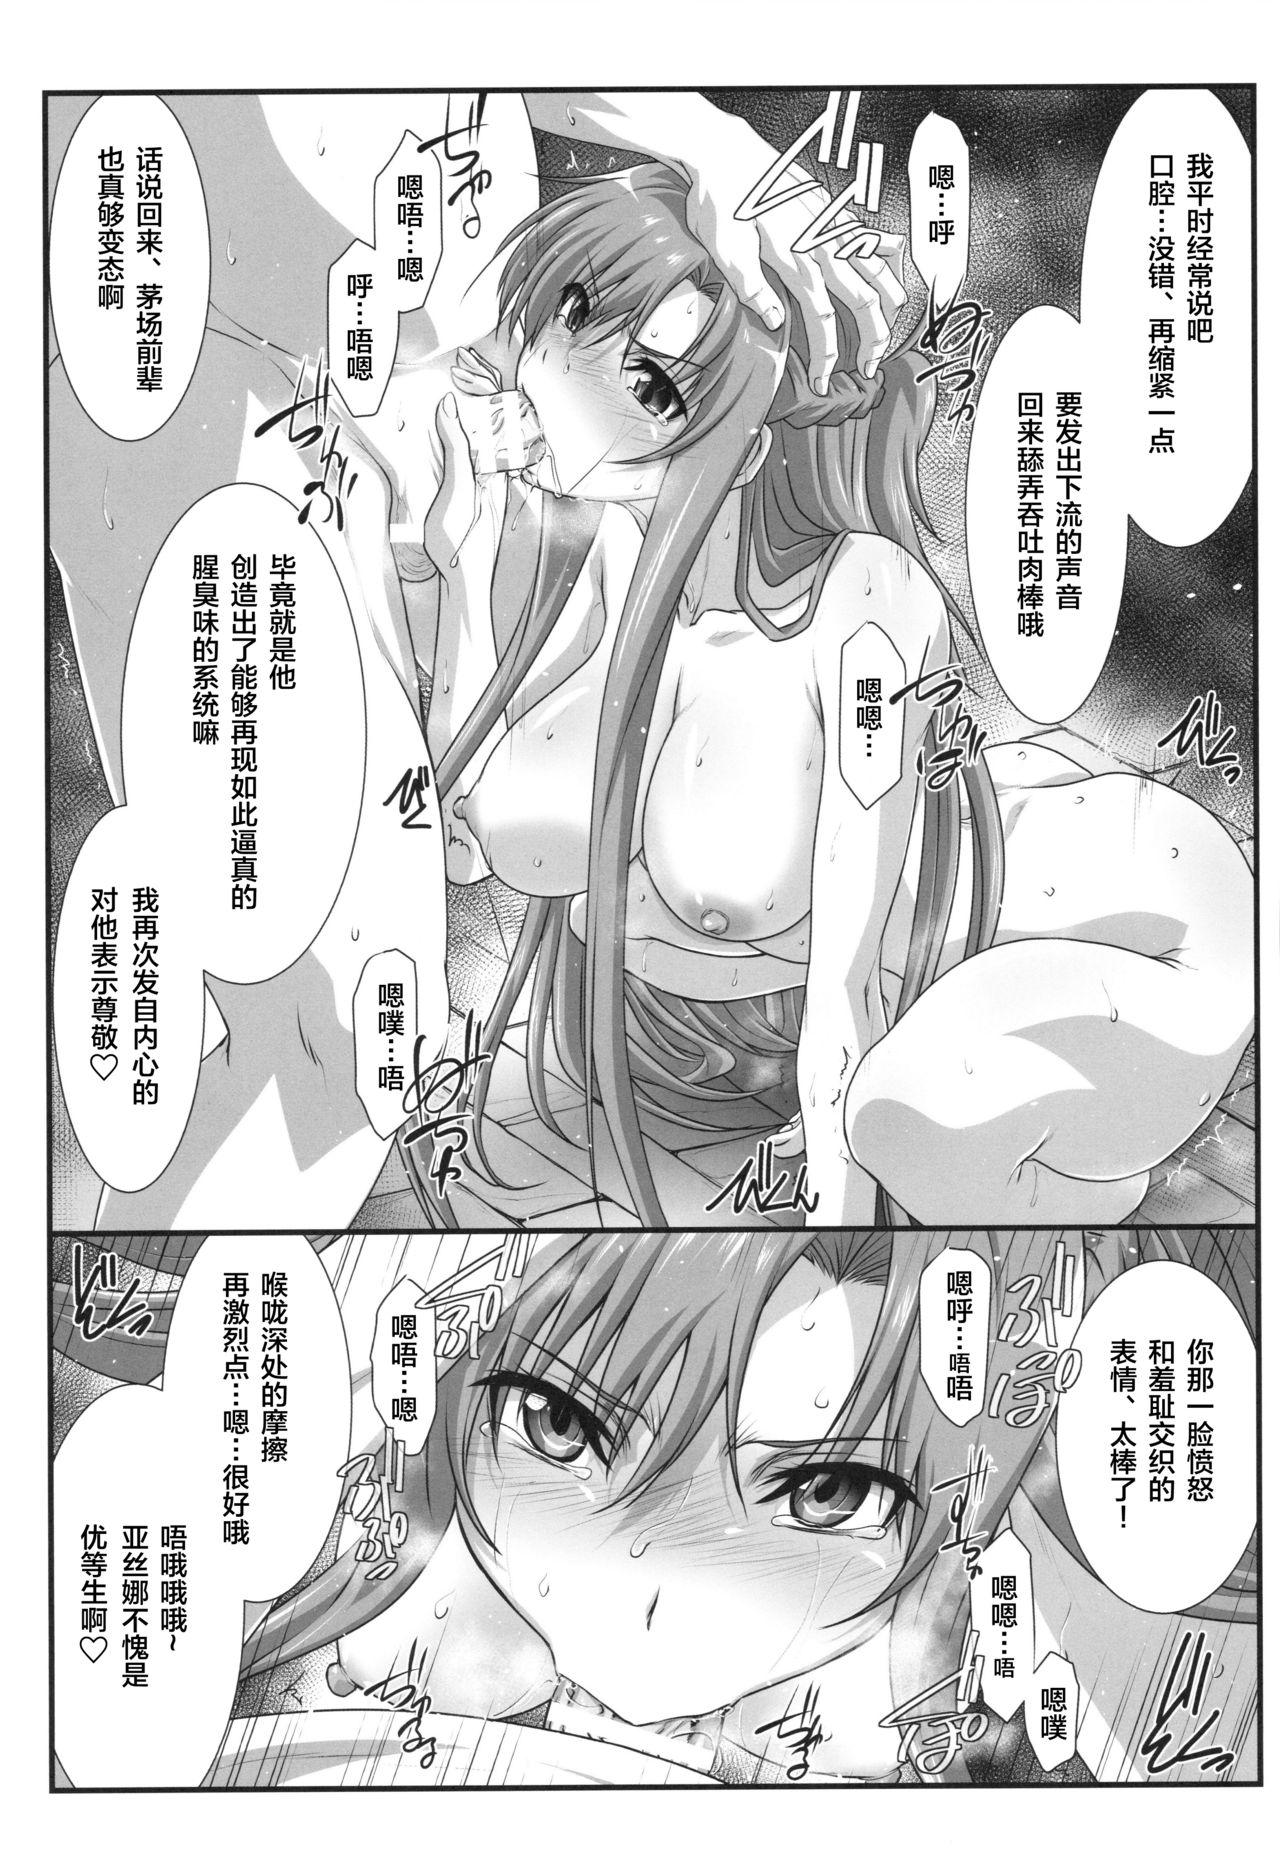 Bigcocks Astral Bout Ver. 41 - Sword art online Pau - Page 6